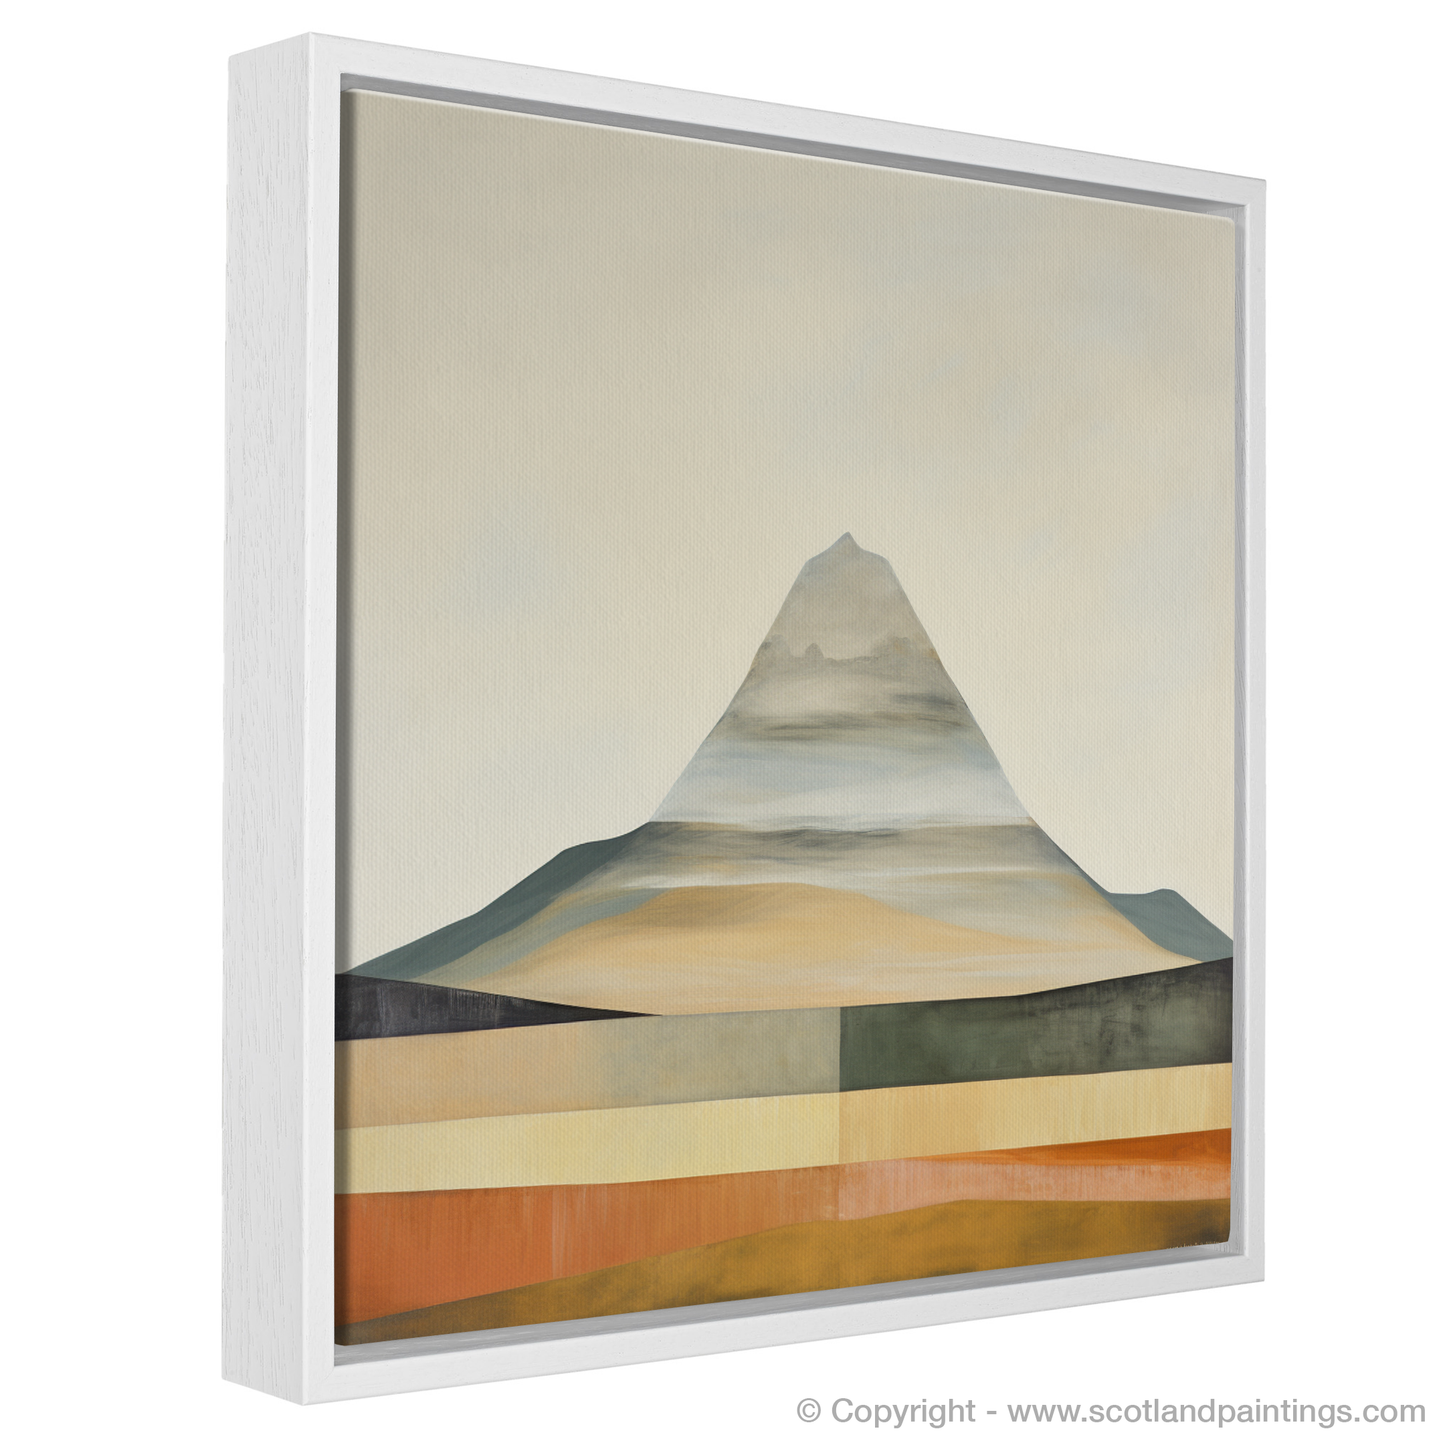 Painting and Art Print of Mount Keen entitled "Abstract Essence of Mount Keen".